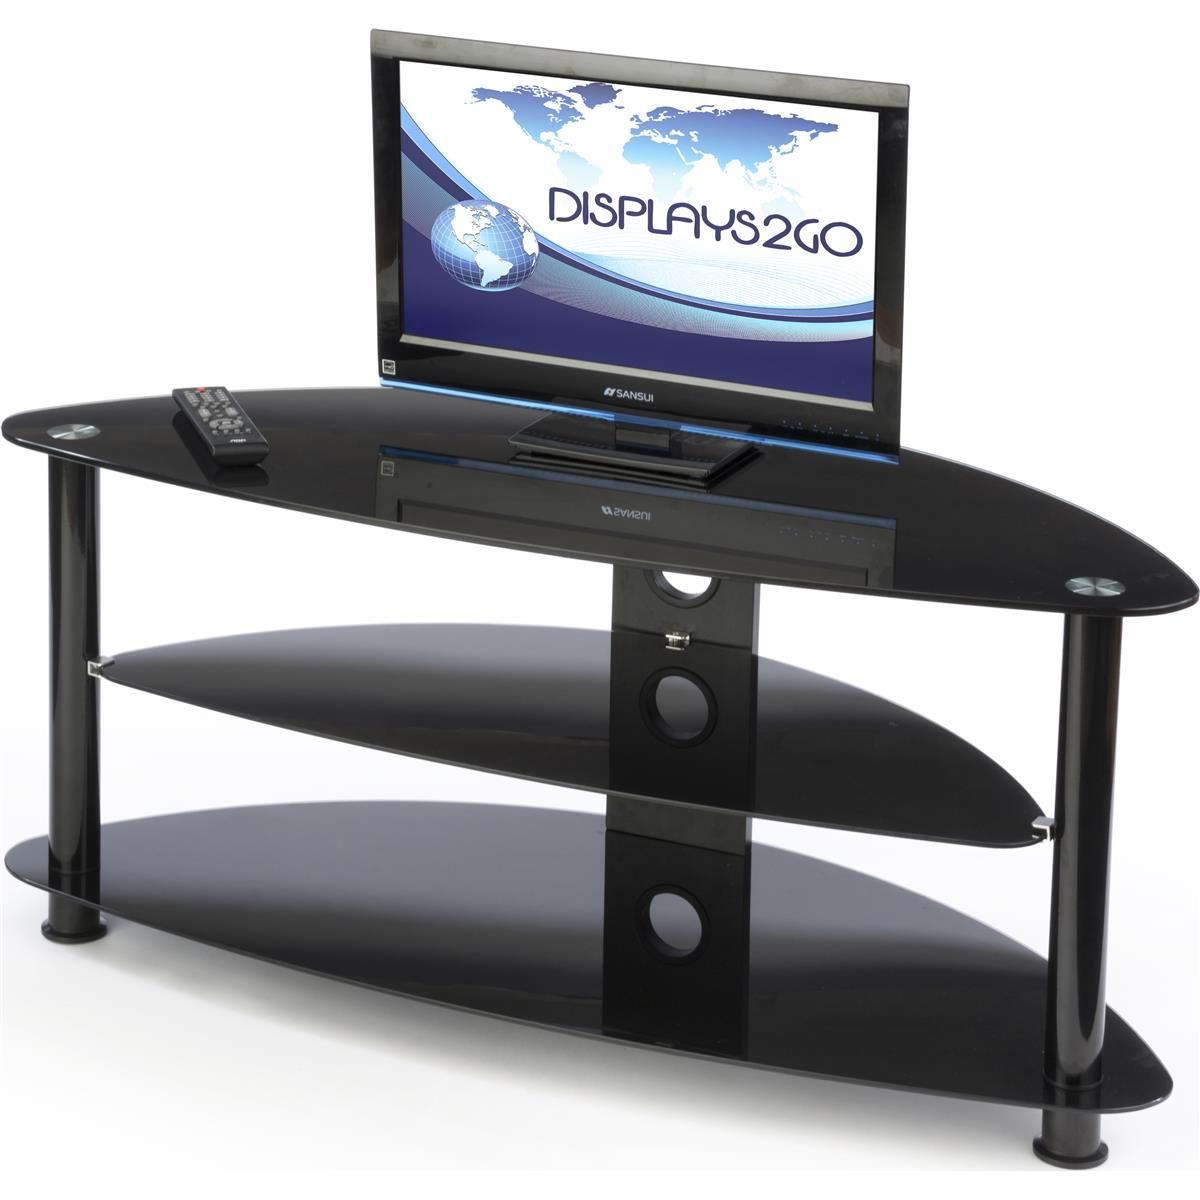 Black Television Stands | Tempered Glass With Black Finish With Regard To Black Glass Tv Stands (View 8 of 15)